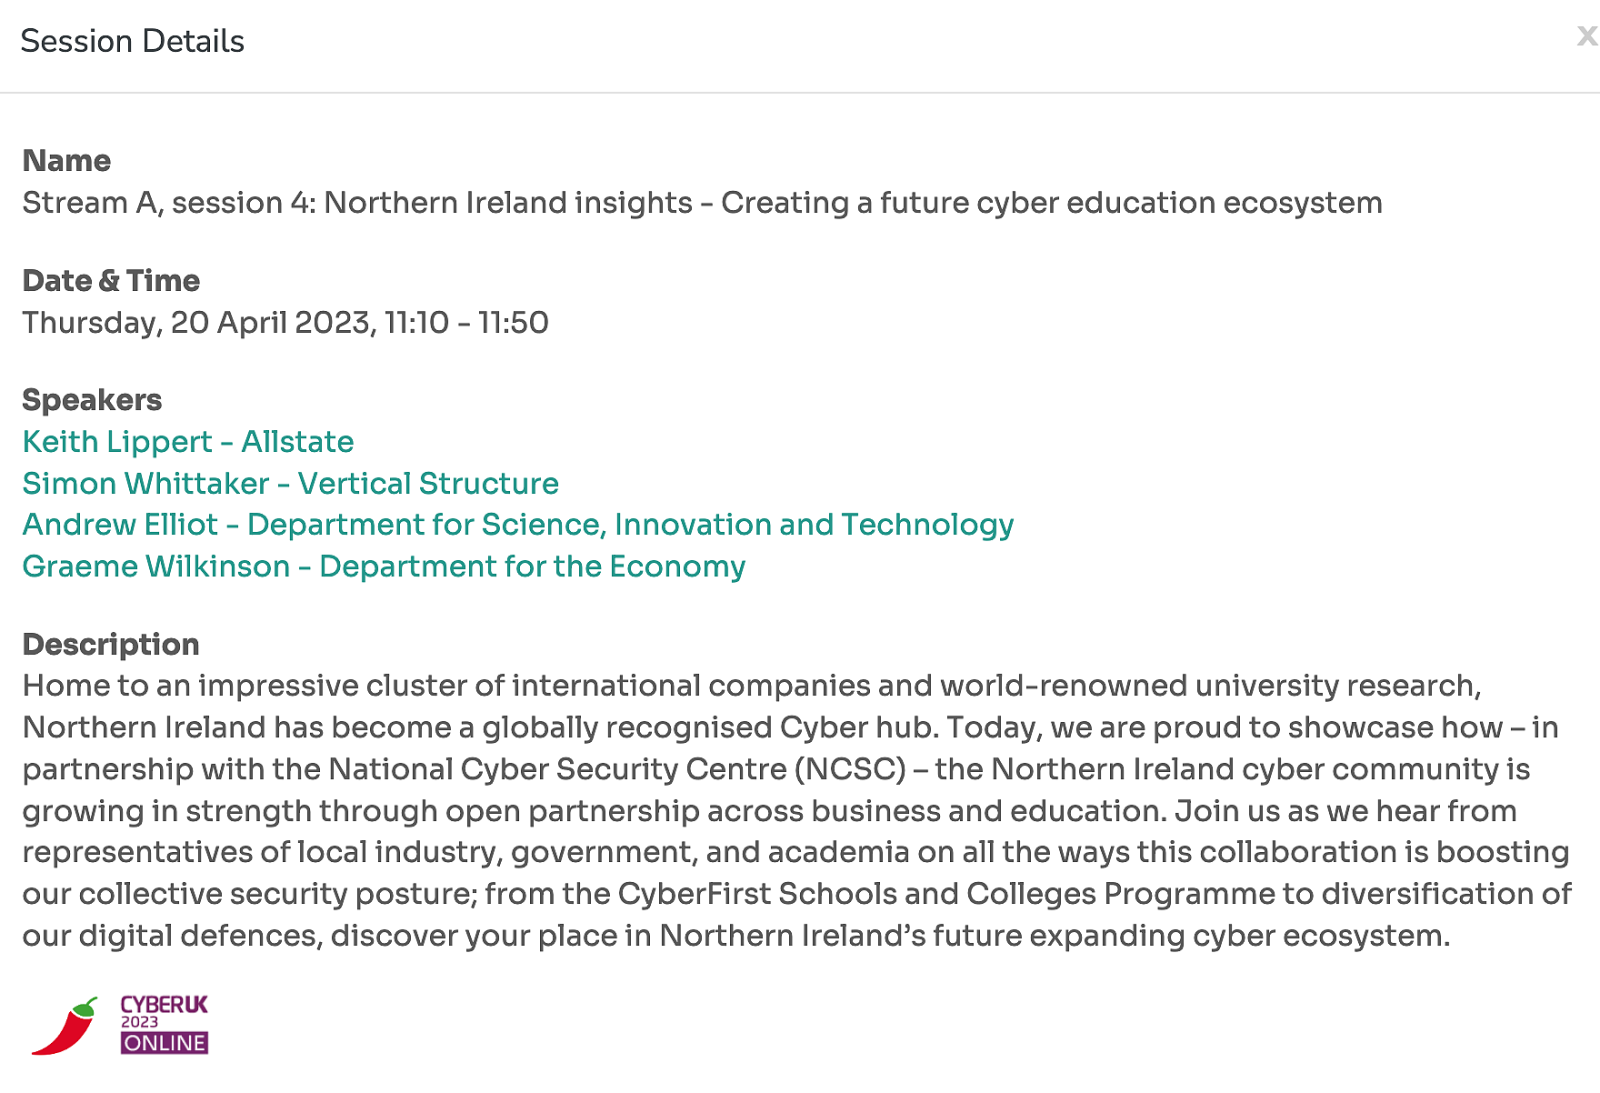 Stream A, session 4: Northern Ireland insights - Creating a future cyber education ecosystem